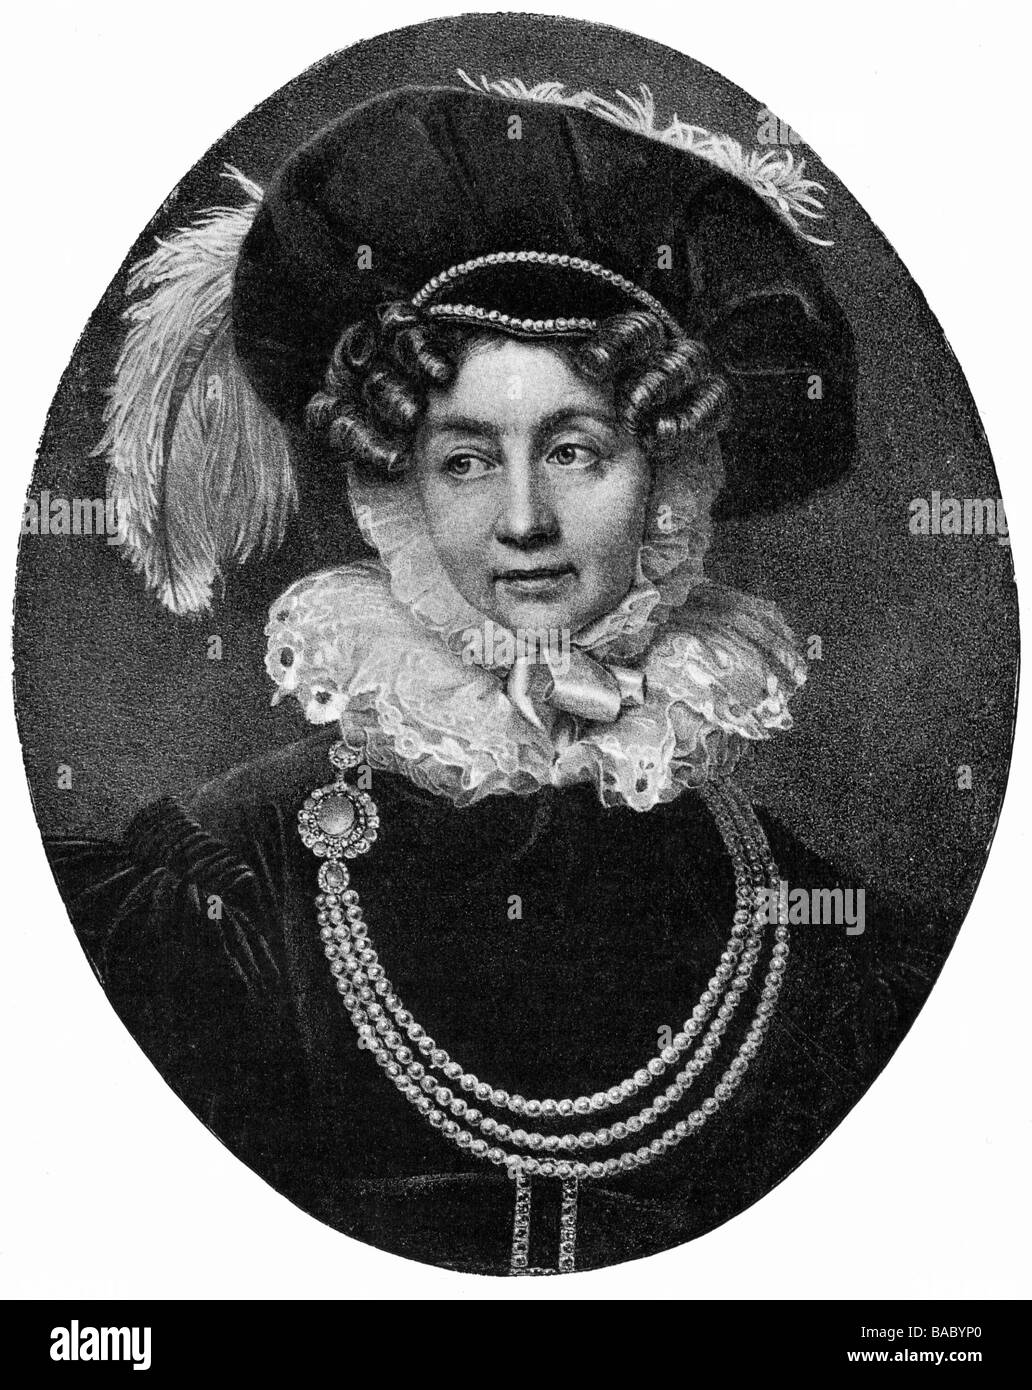 Thurn und Taxis, Therese Mathilde Princess of, 5.7.1773 - 12.2.1839, portrait, after contemporary lithograph, 19th century, Stock Photo